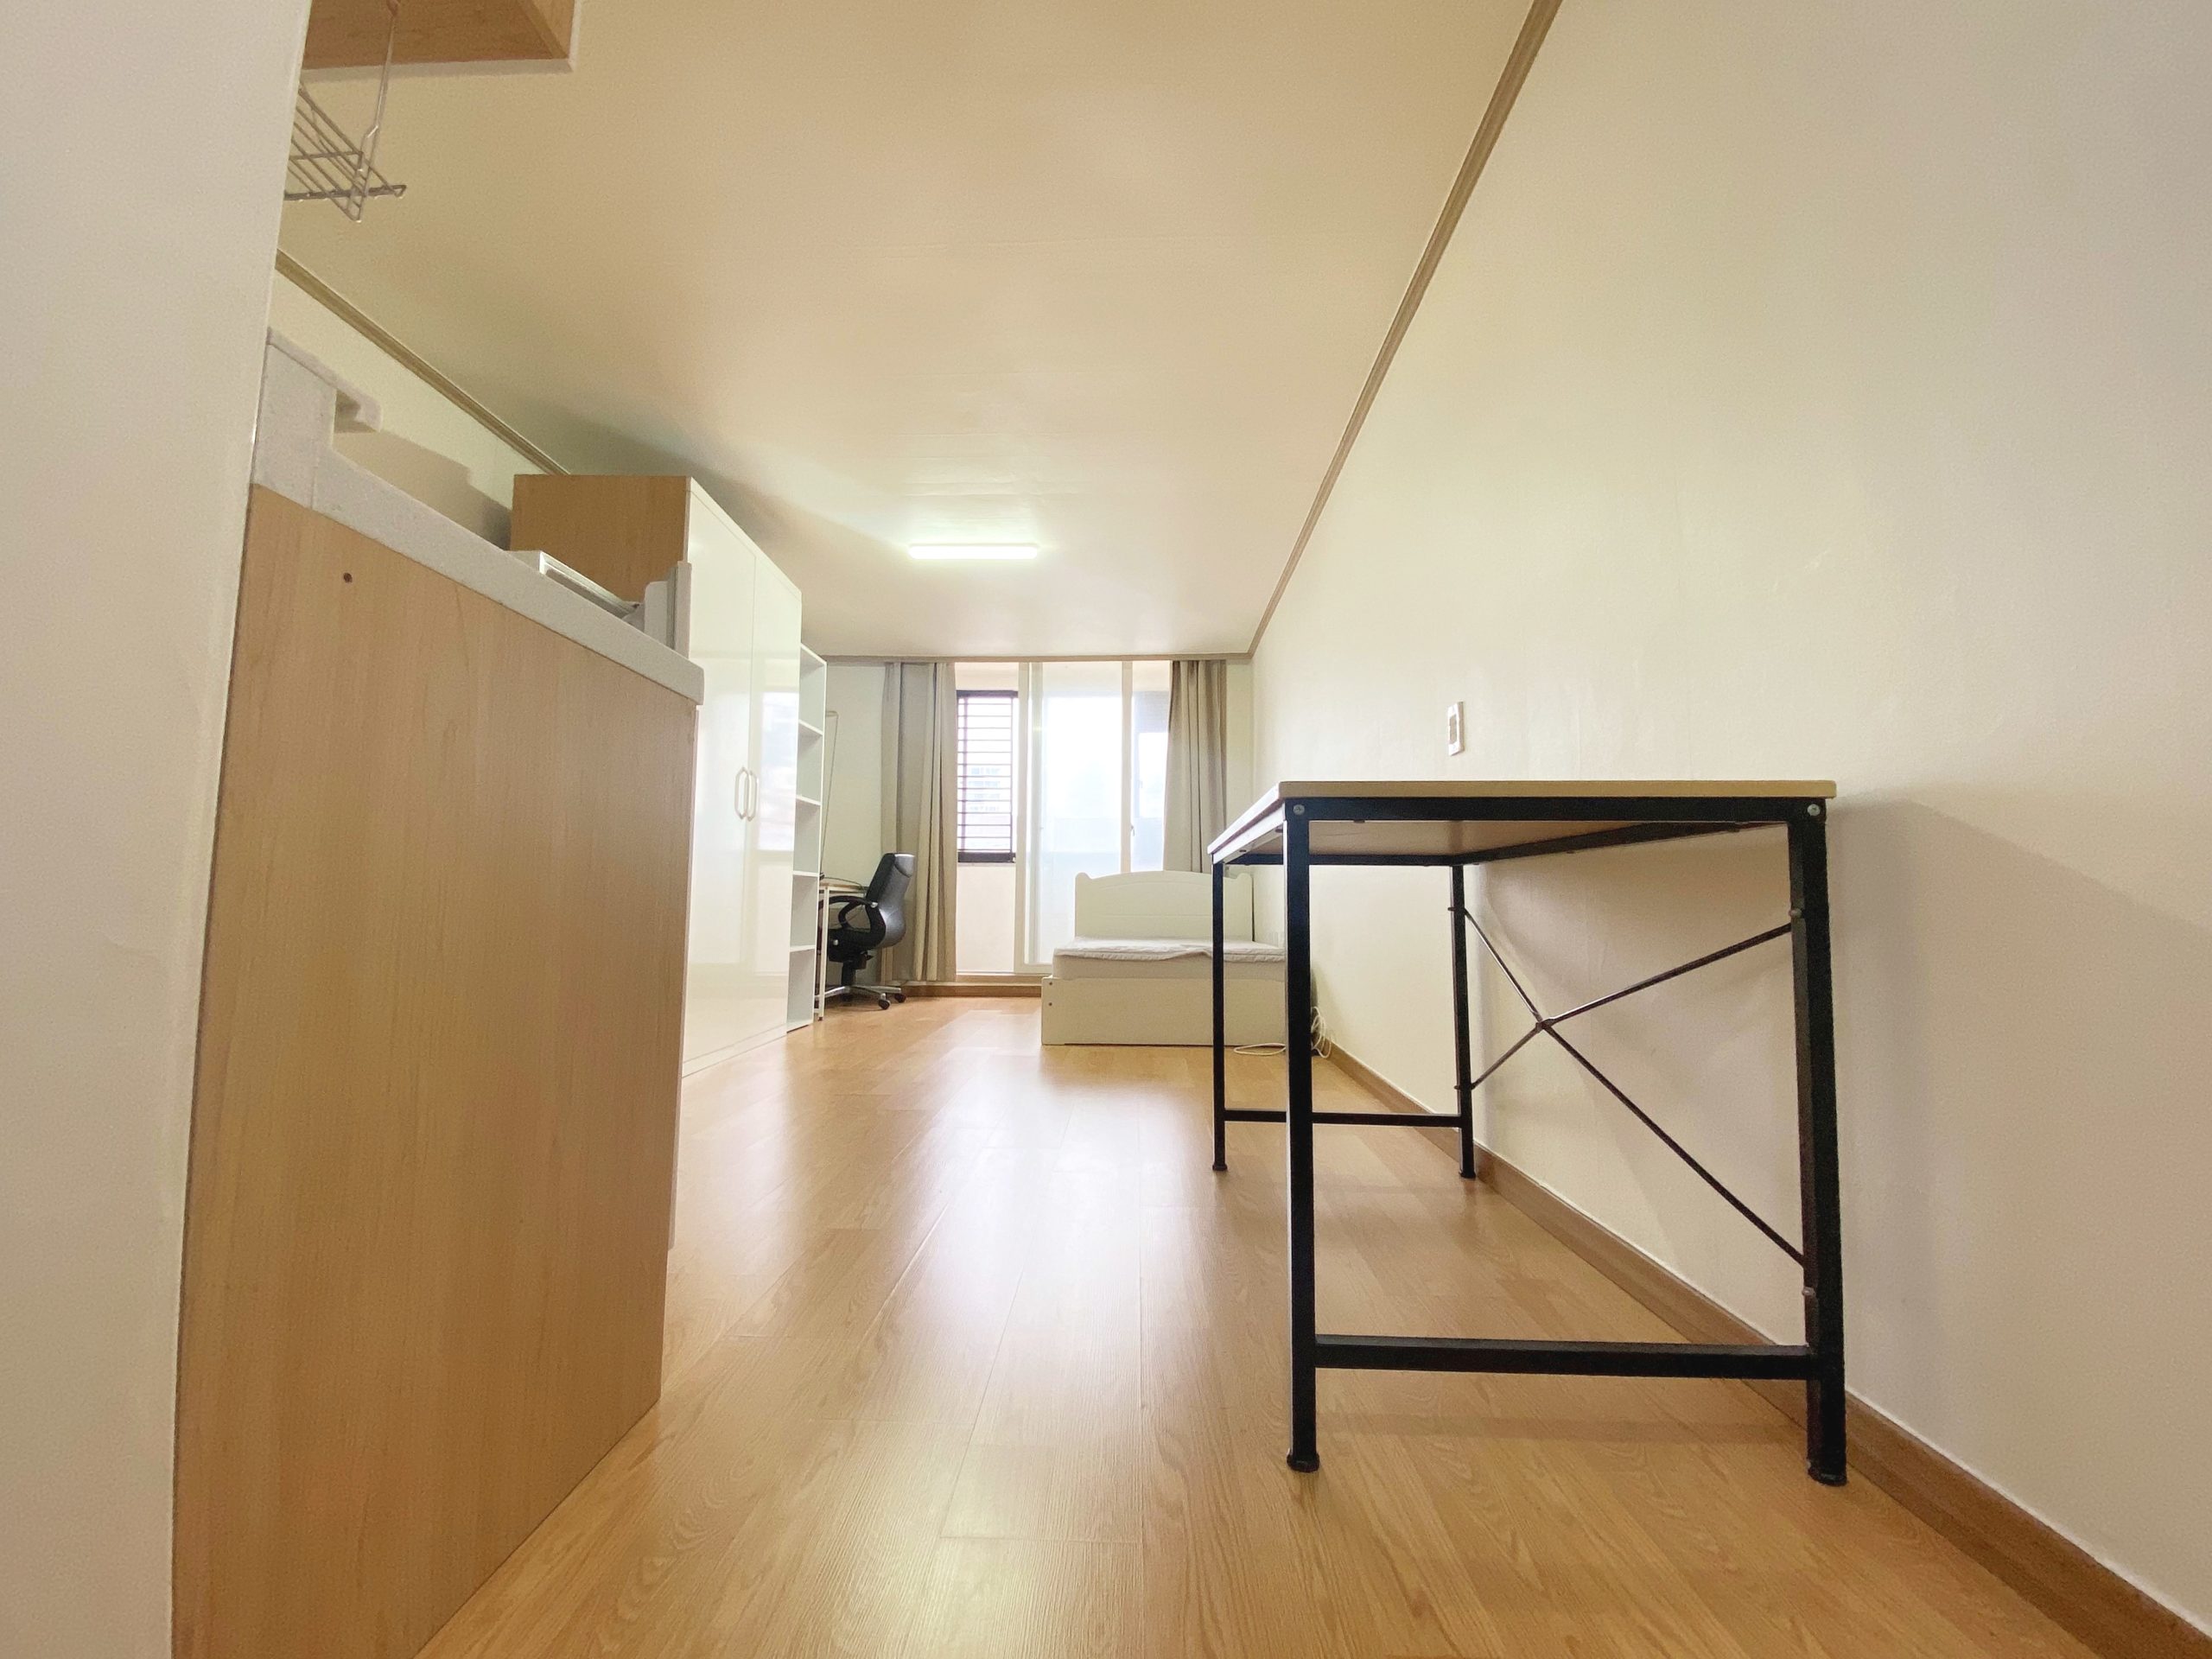 EWHA/SINCHON- 1000/60+5 LONG-TERM STUDIO (INTERNET INCLUDED) *WOMEN ONLY